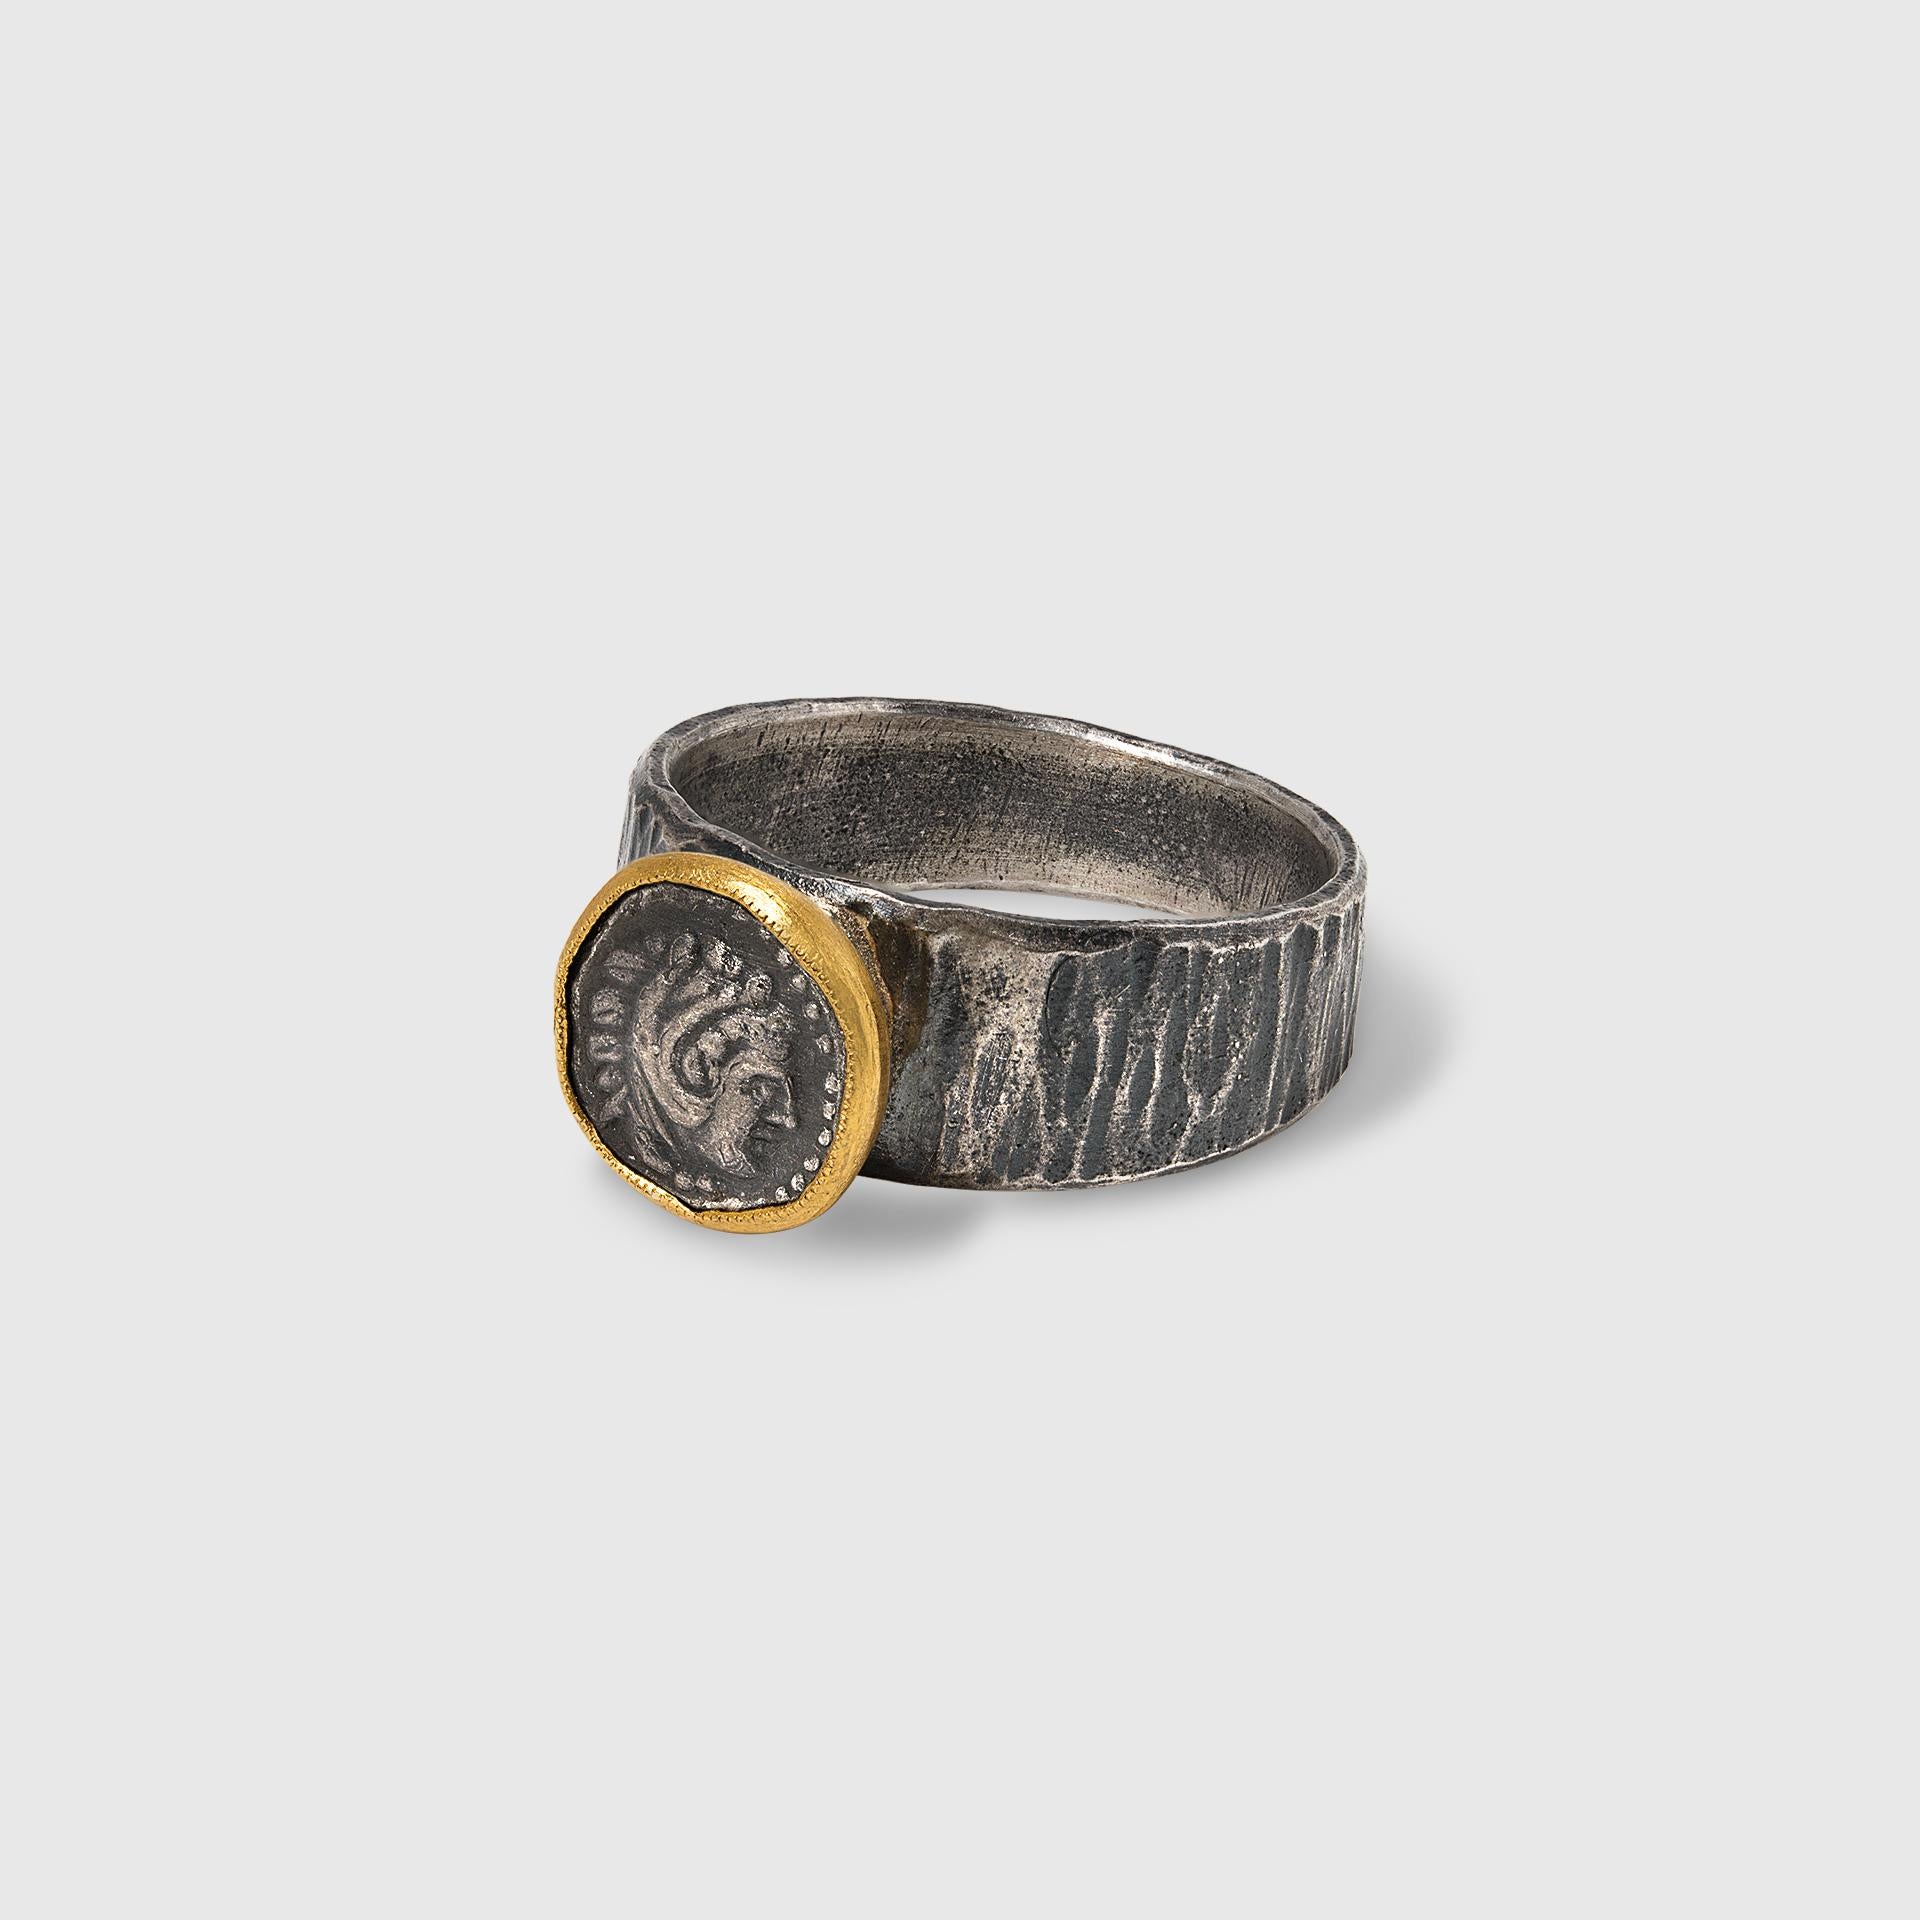 Classical Roman Greek Head, Alexander the Great, Miniature Coin 'Replica' Stacker Ring For Sale